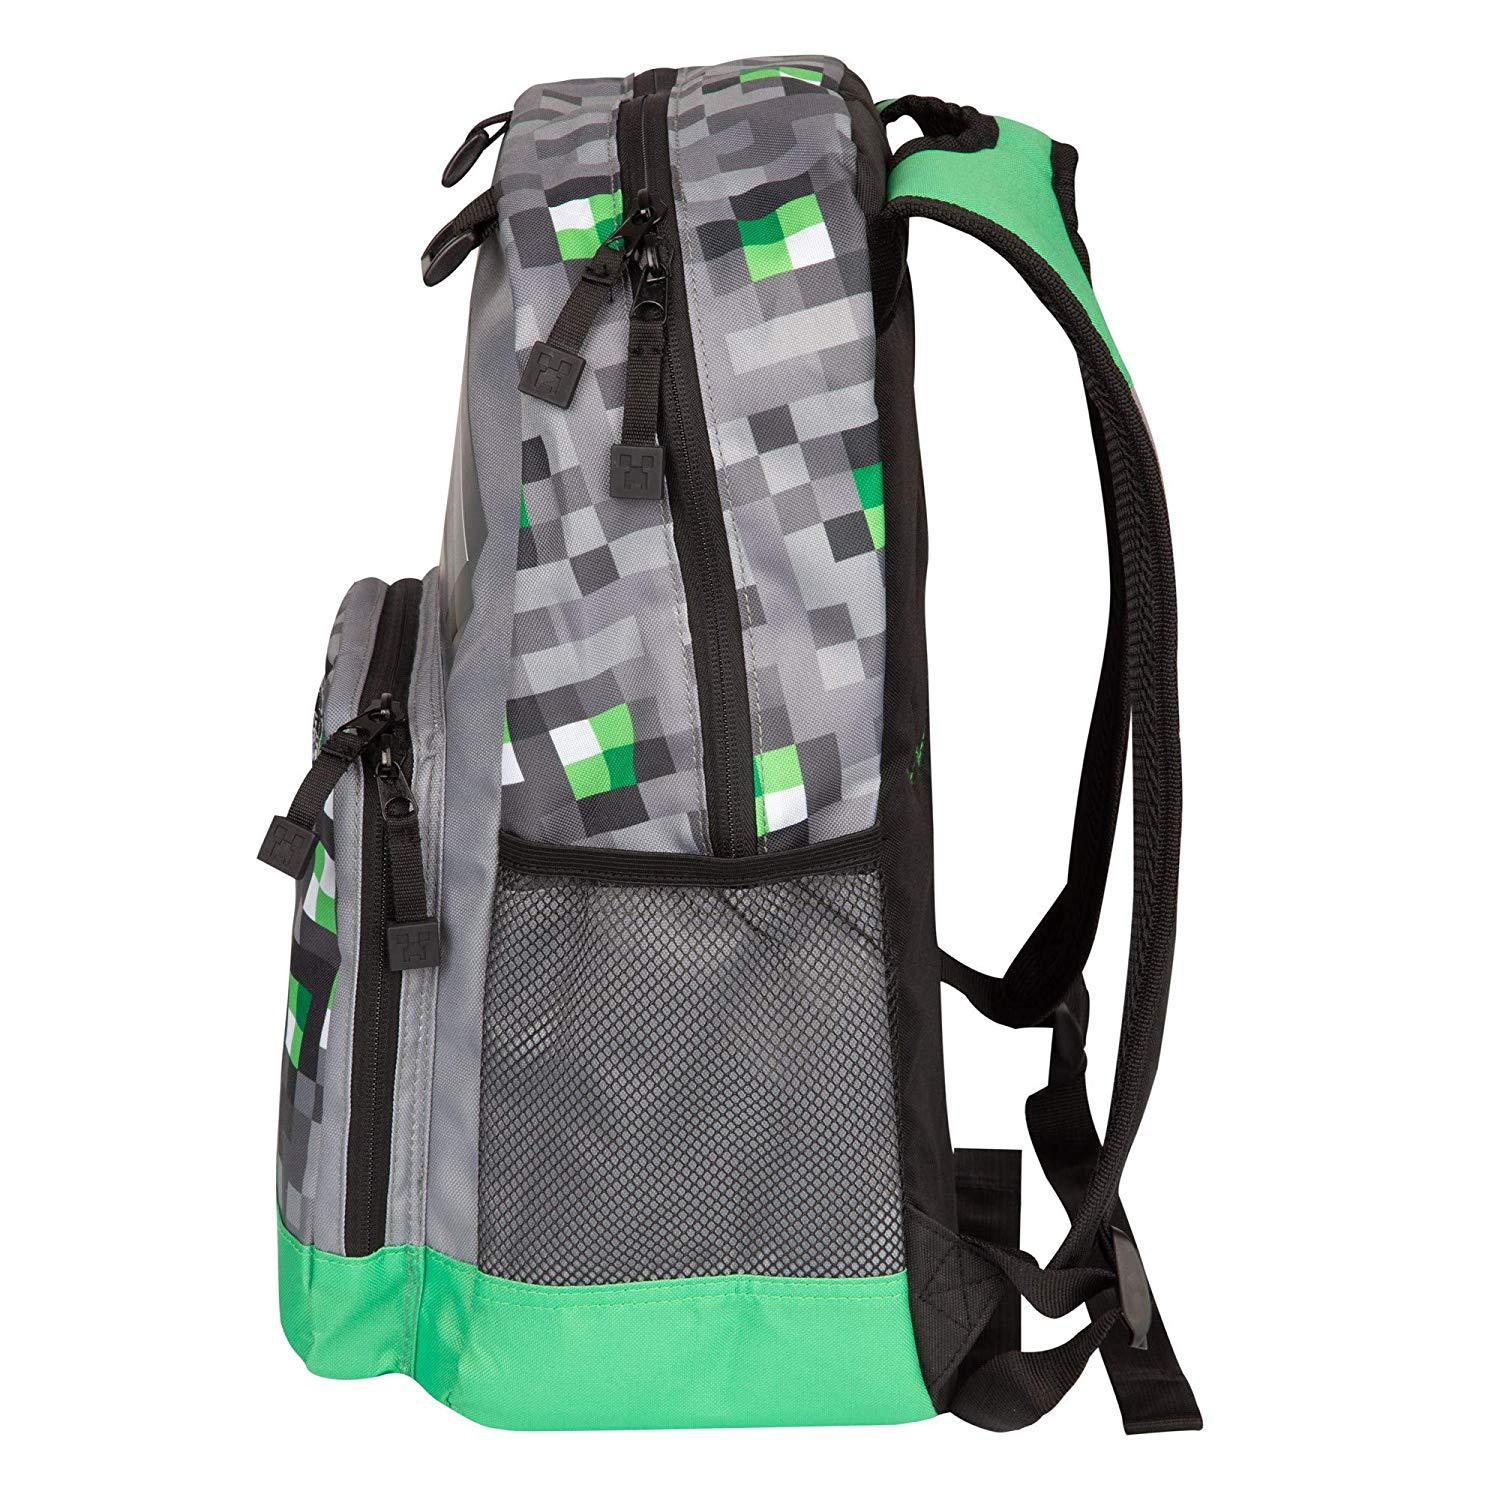 Creeper Green back to schoold backpack for kid cool school bag GXF-S3 - CIVIBUY